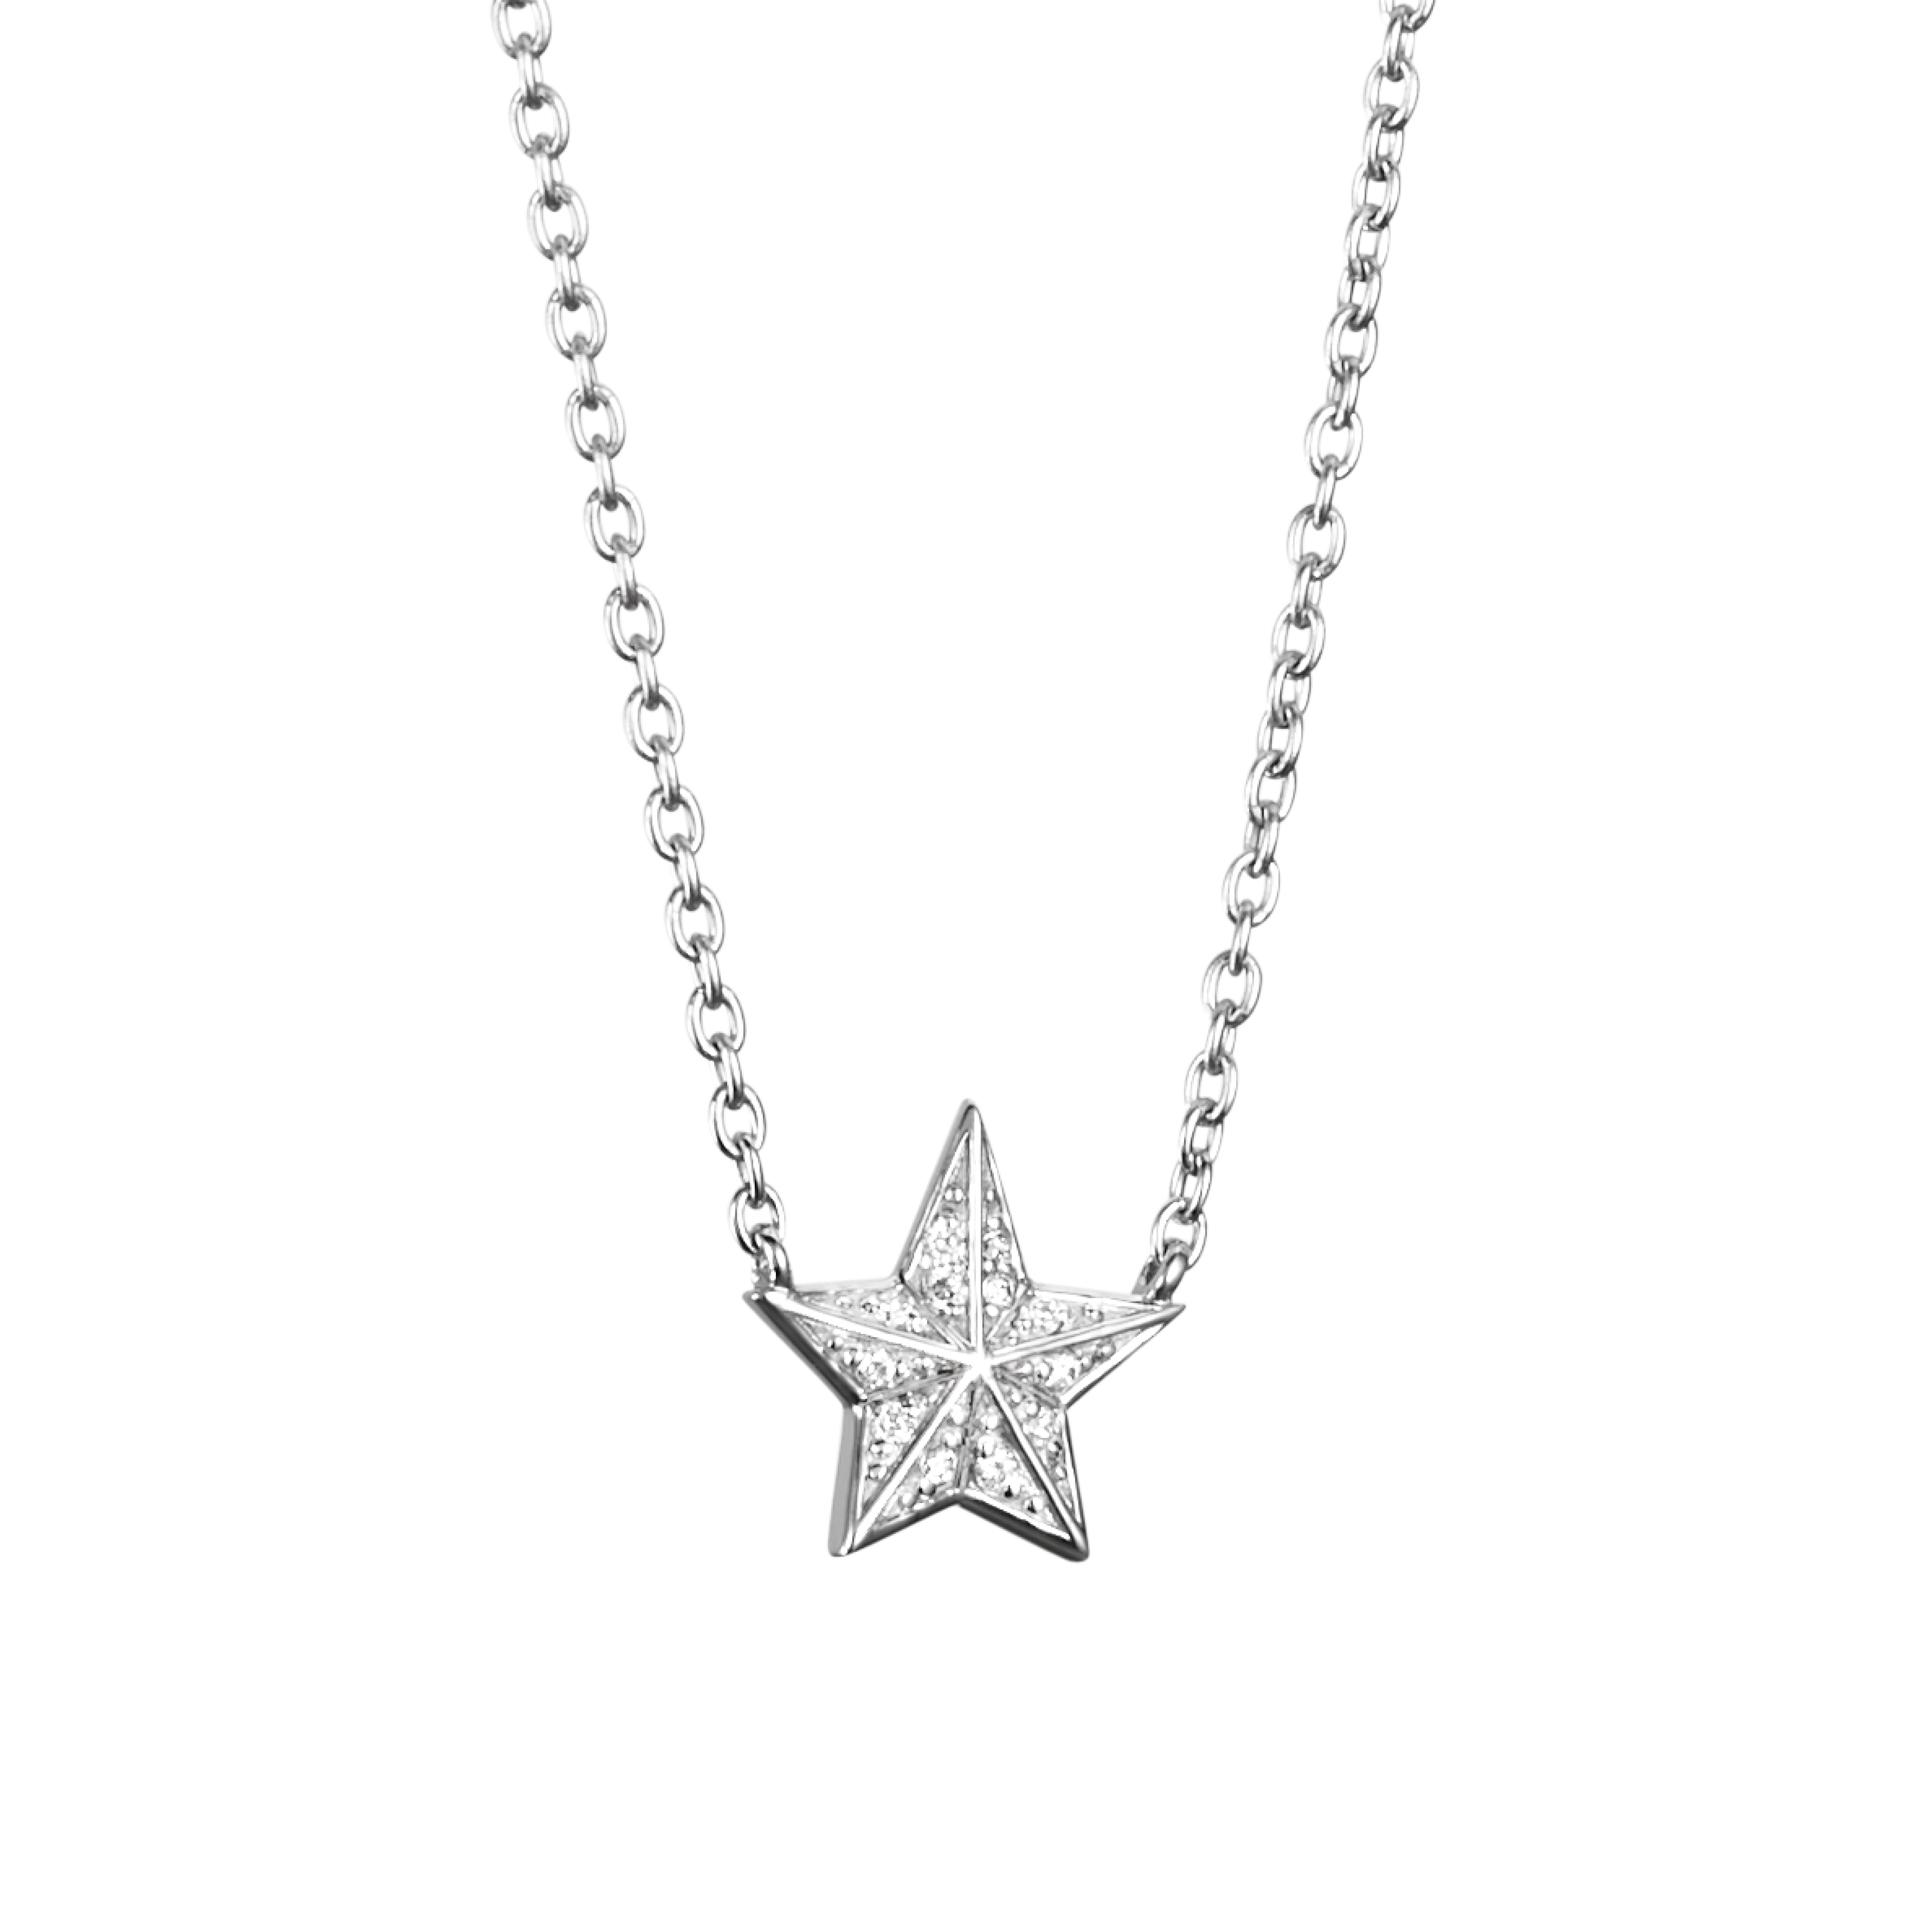 CATCH A FALLING STAR & STARS NECKLACE